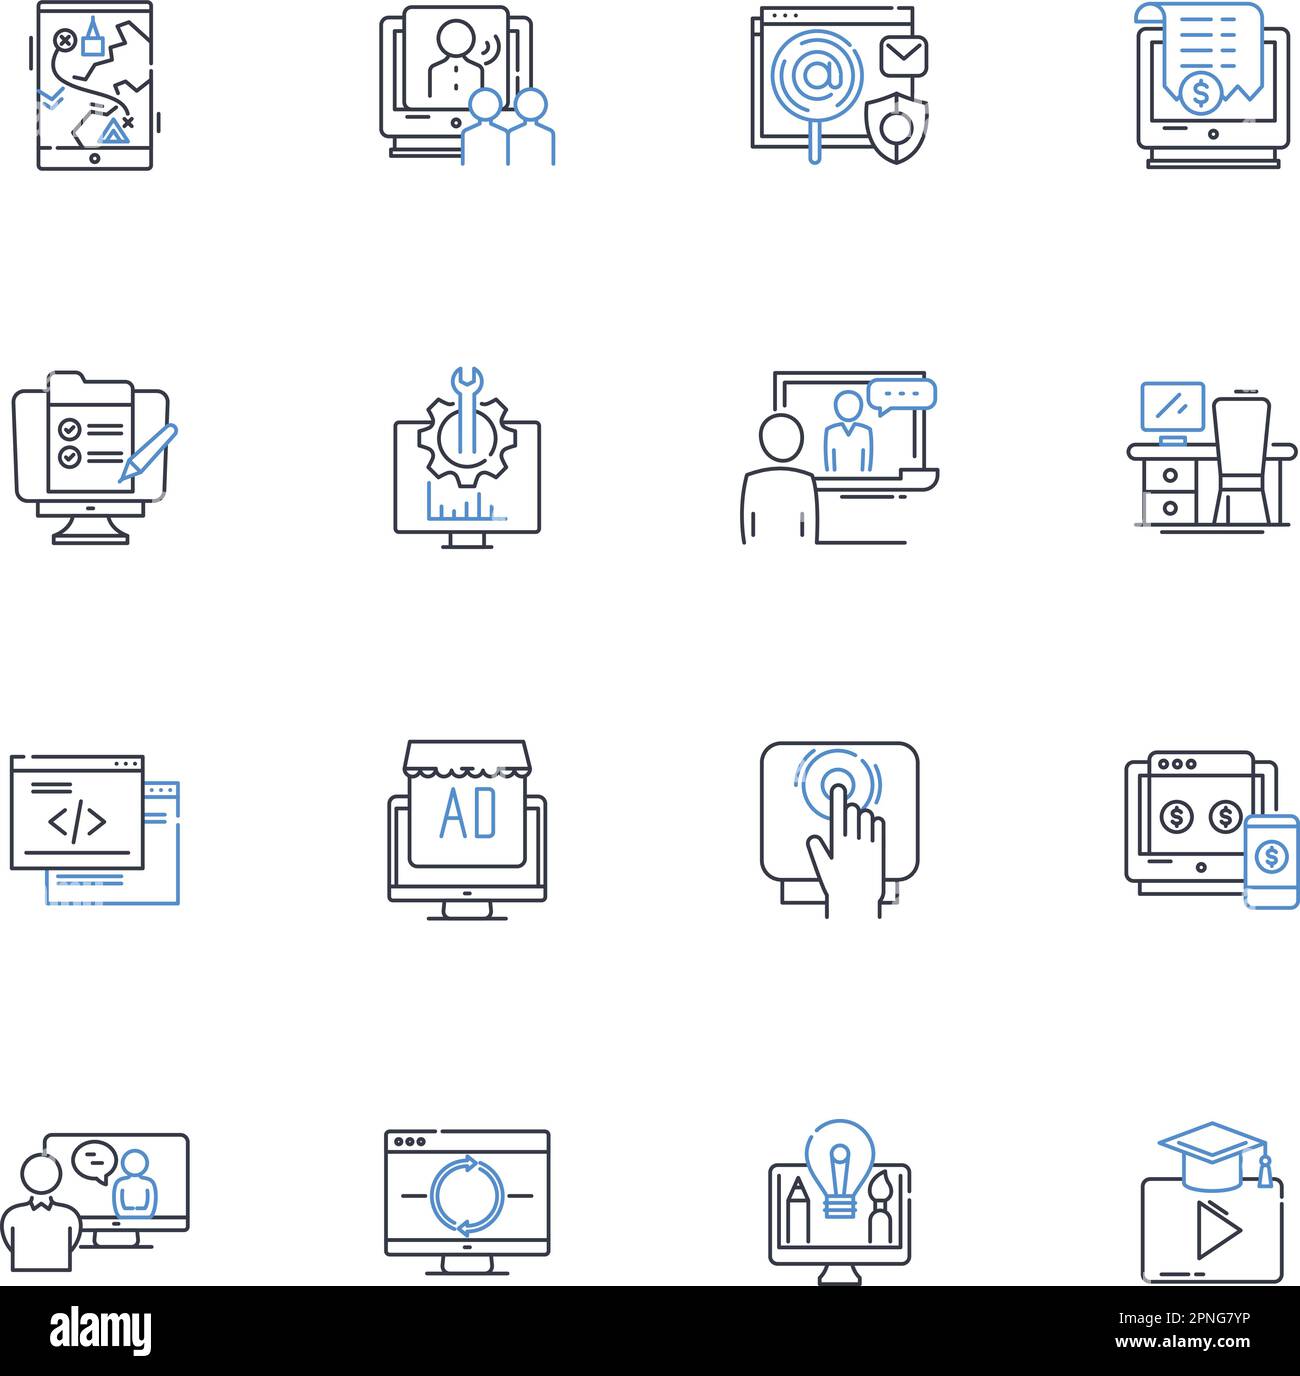 Office software line icons collection. Word, Excel, PowerPoint, Outlook, Access, Publisher, OneNote vector and linear illustration. Visio,Project Stock Vector